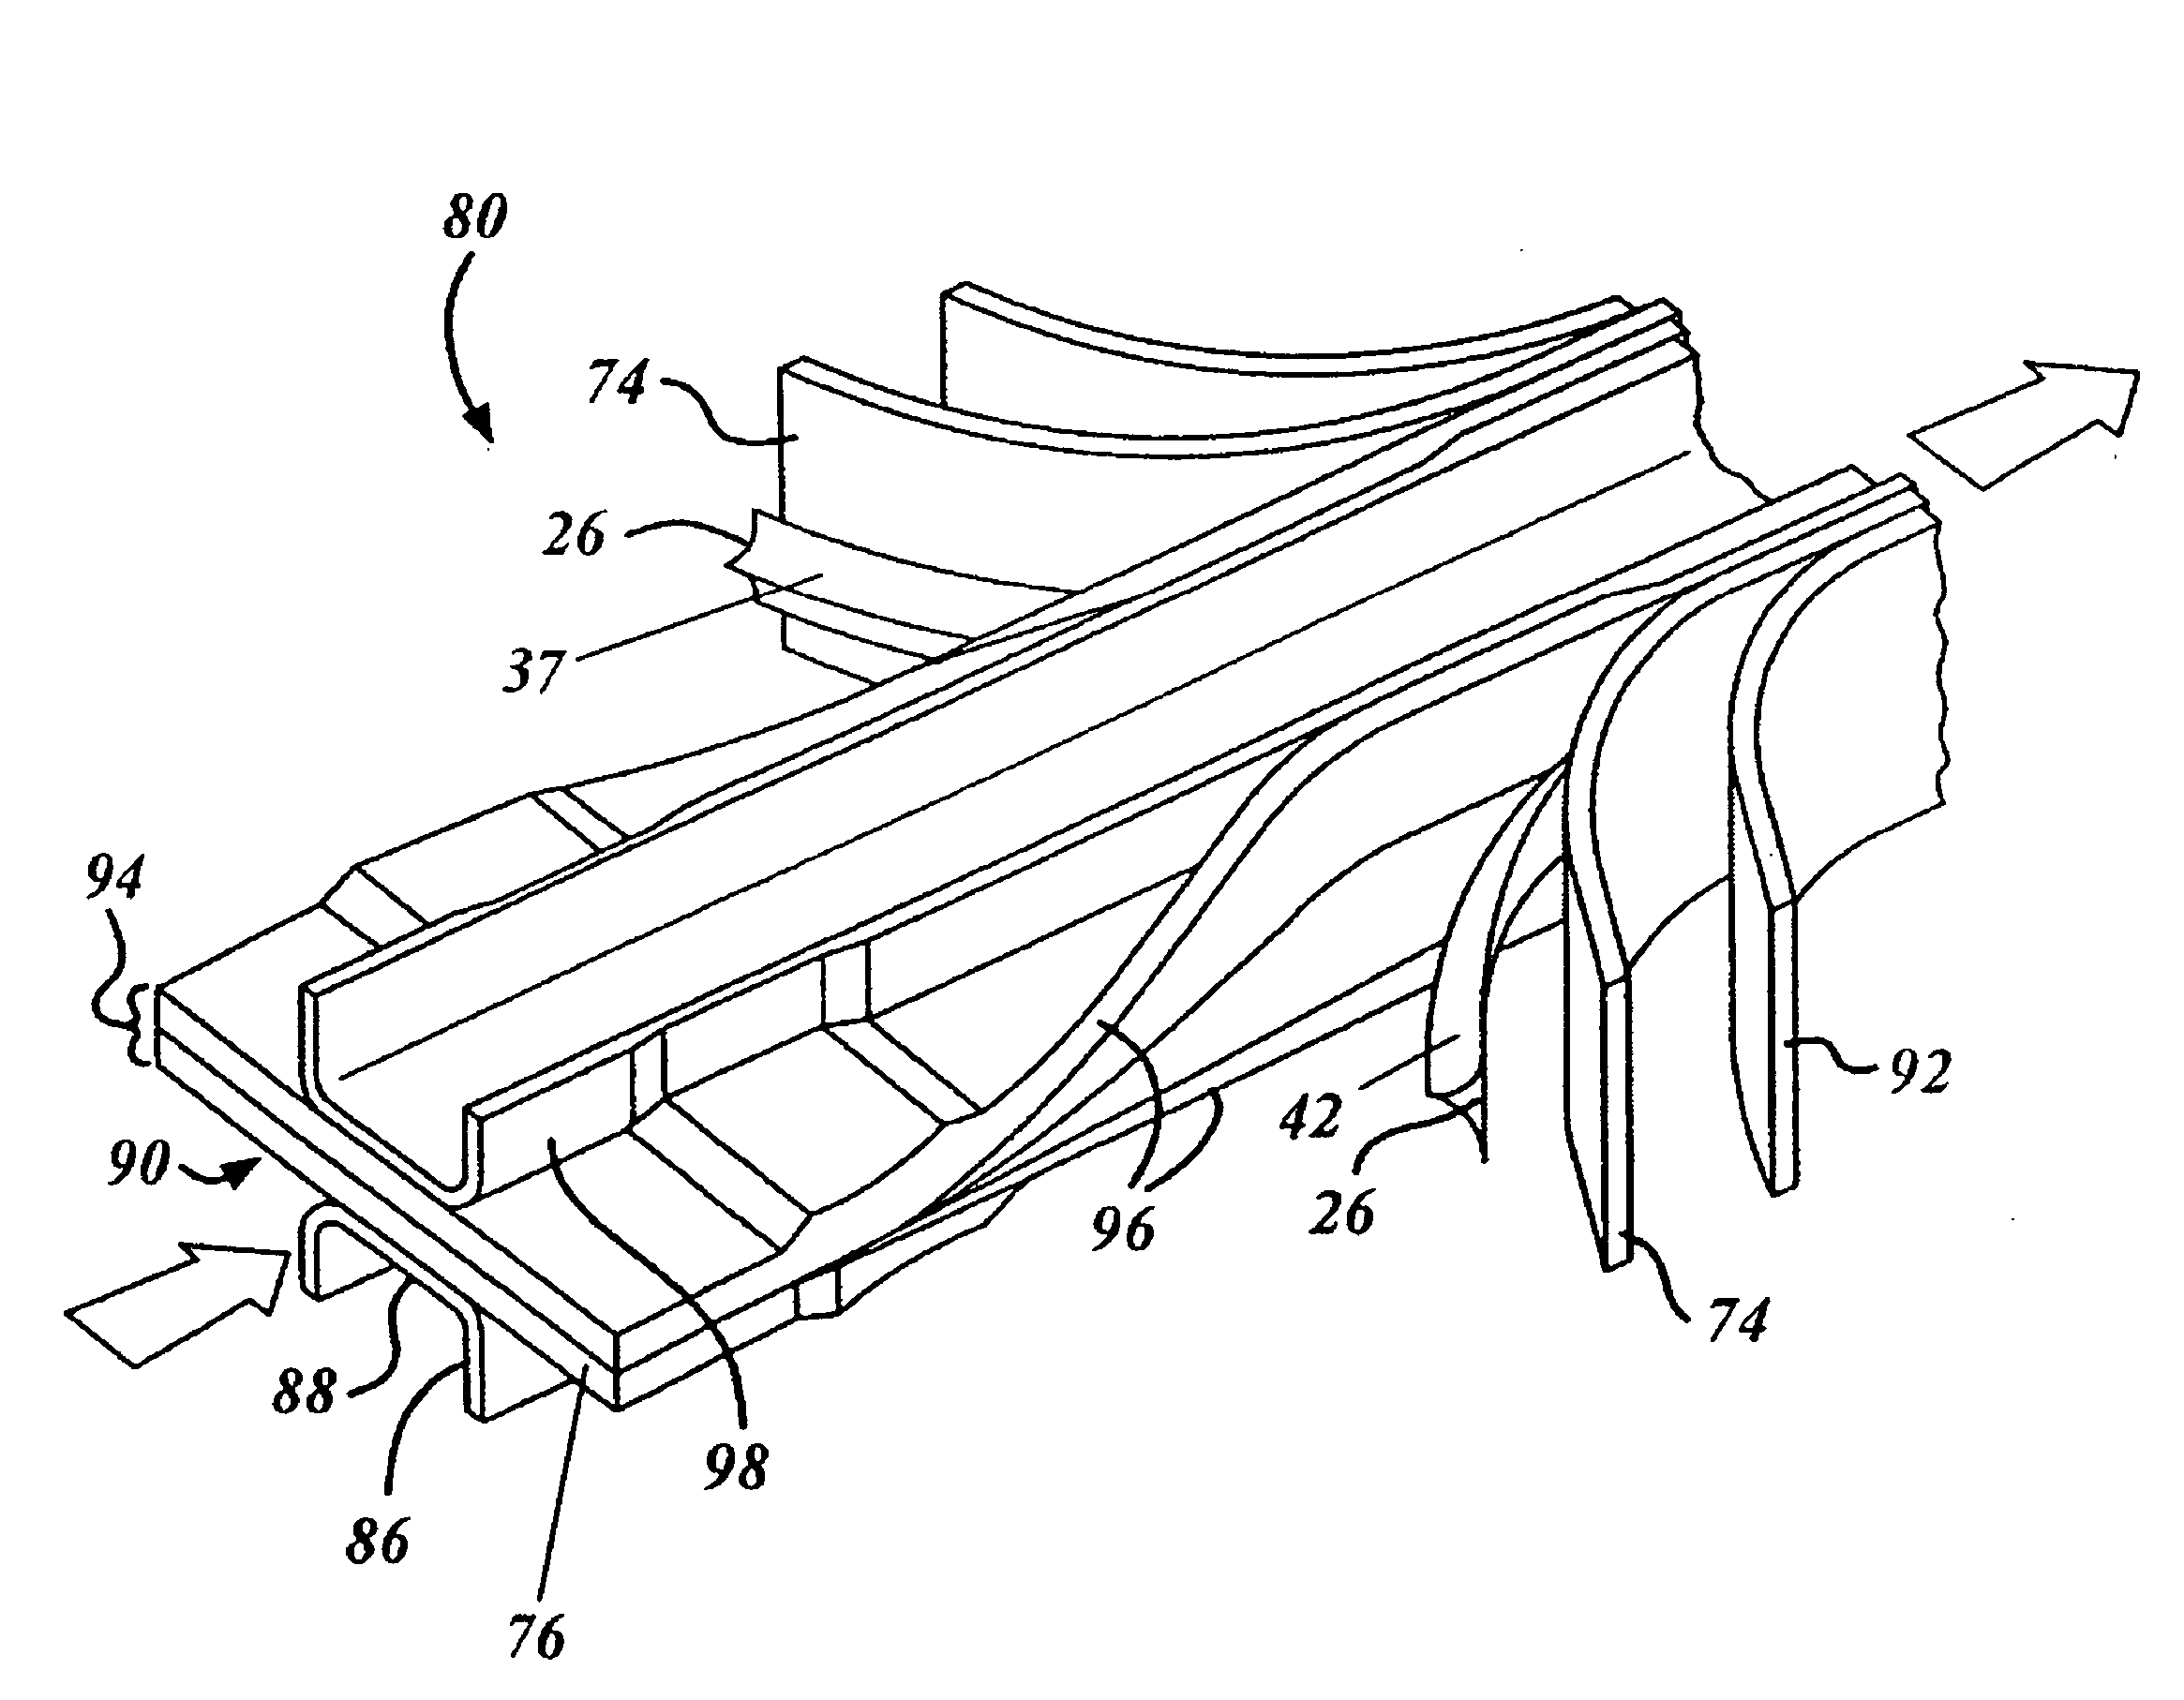 Fabrication process for thermoplastic composite parts